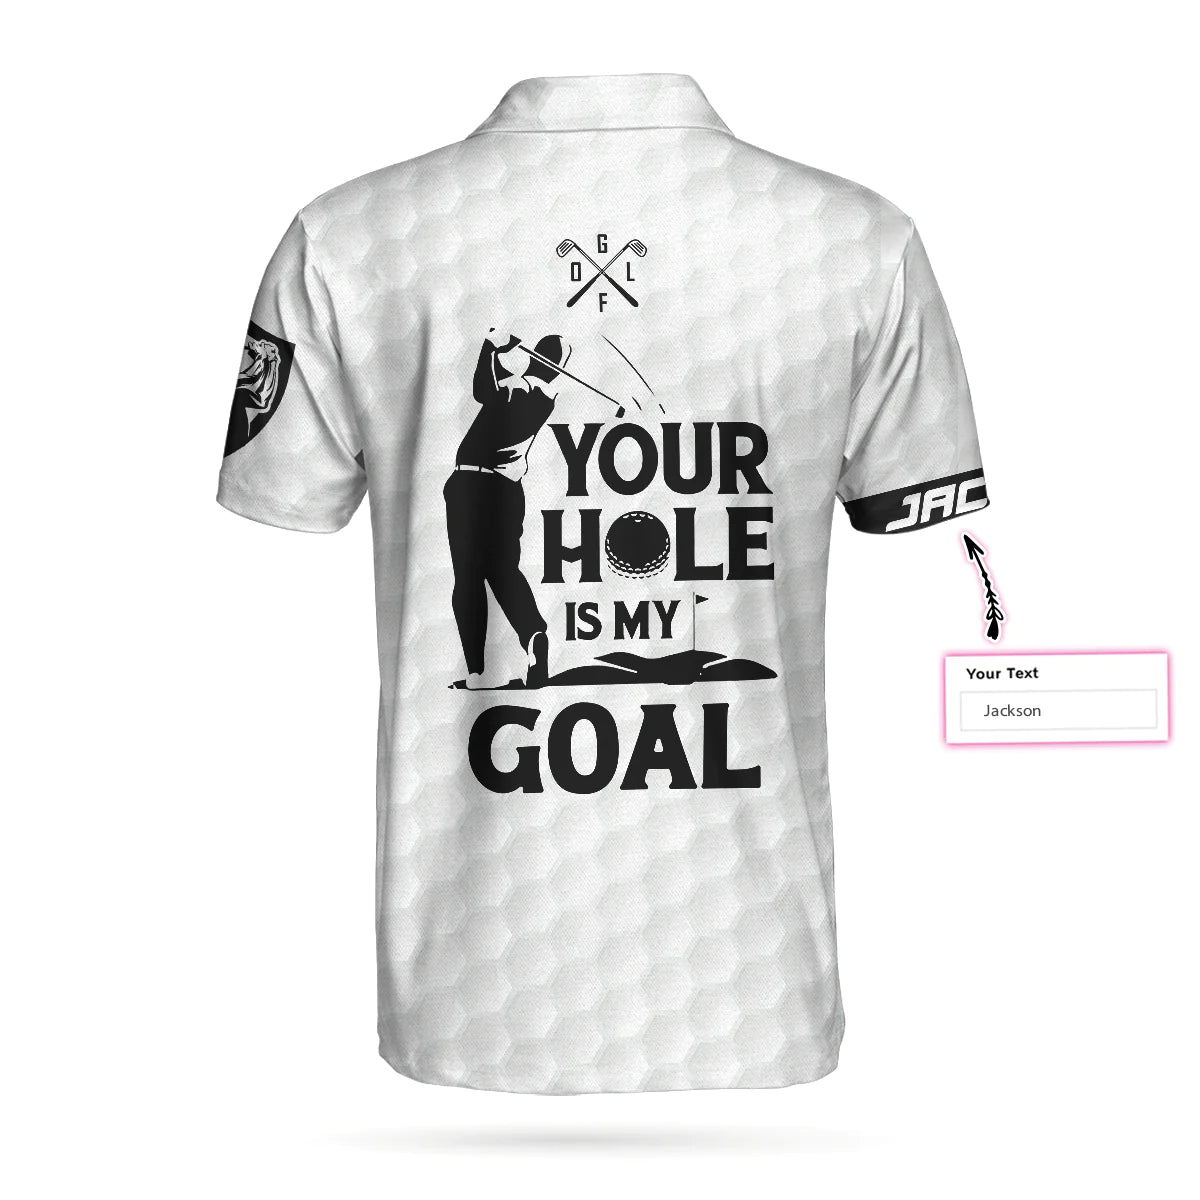 customized white american flag polo shirt perfect golf shirt for men with your hole is my goal design gp433 t7zgy